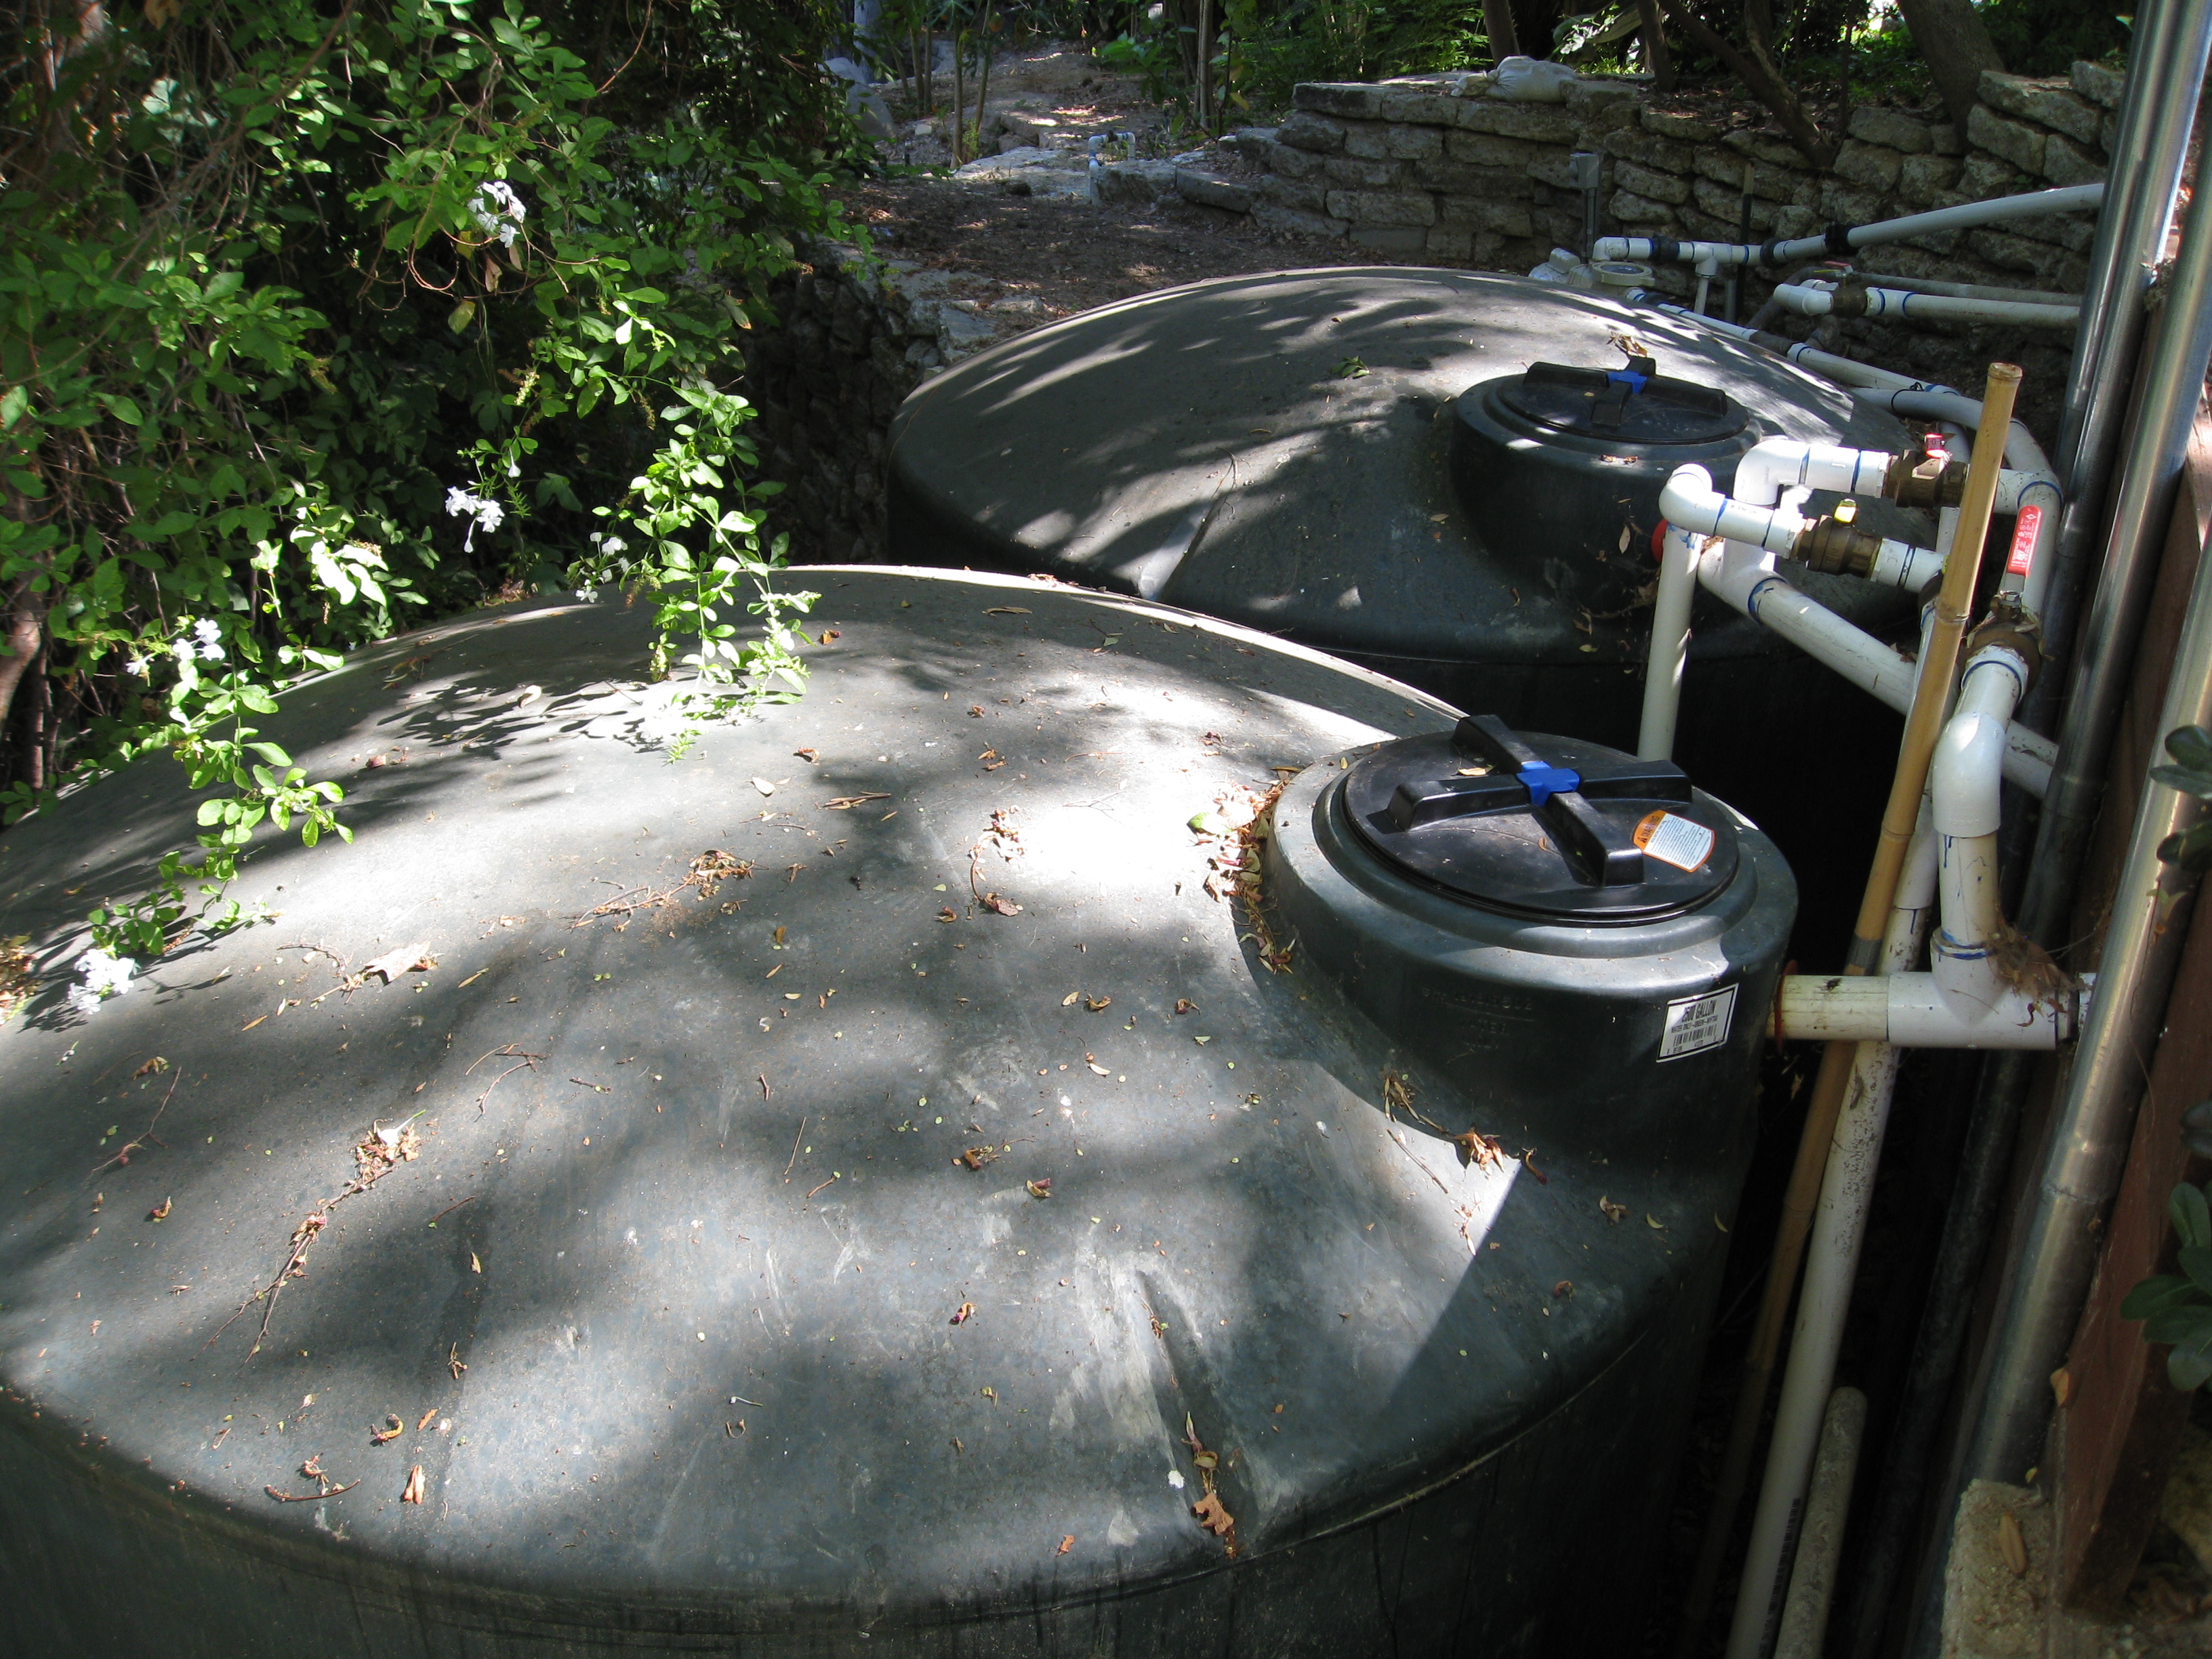 2 2,500 gallon tanks are nestled into the base of the hillside. 